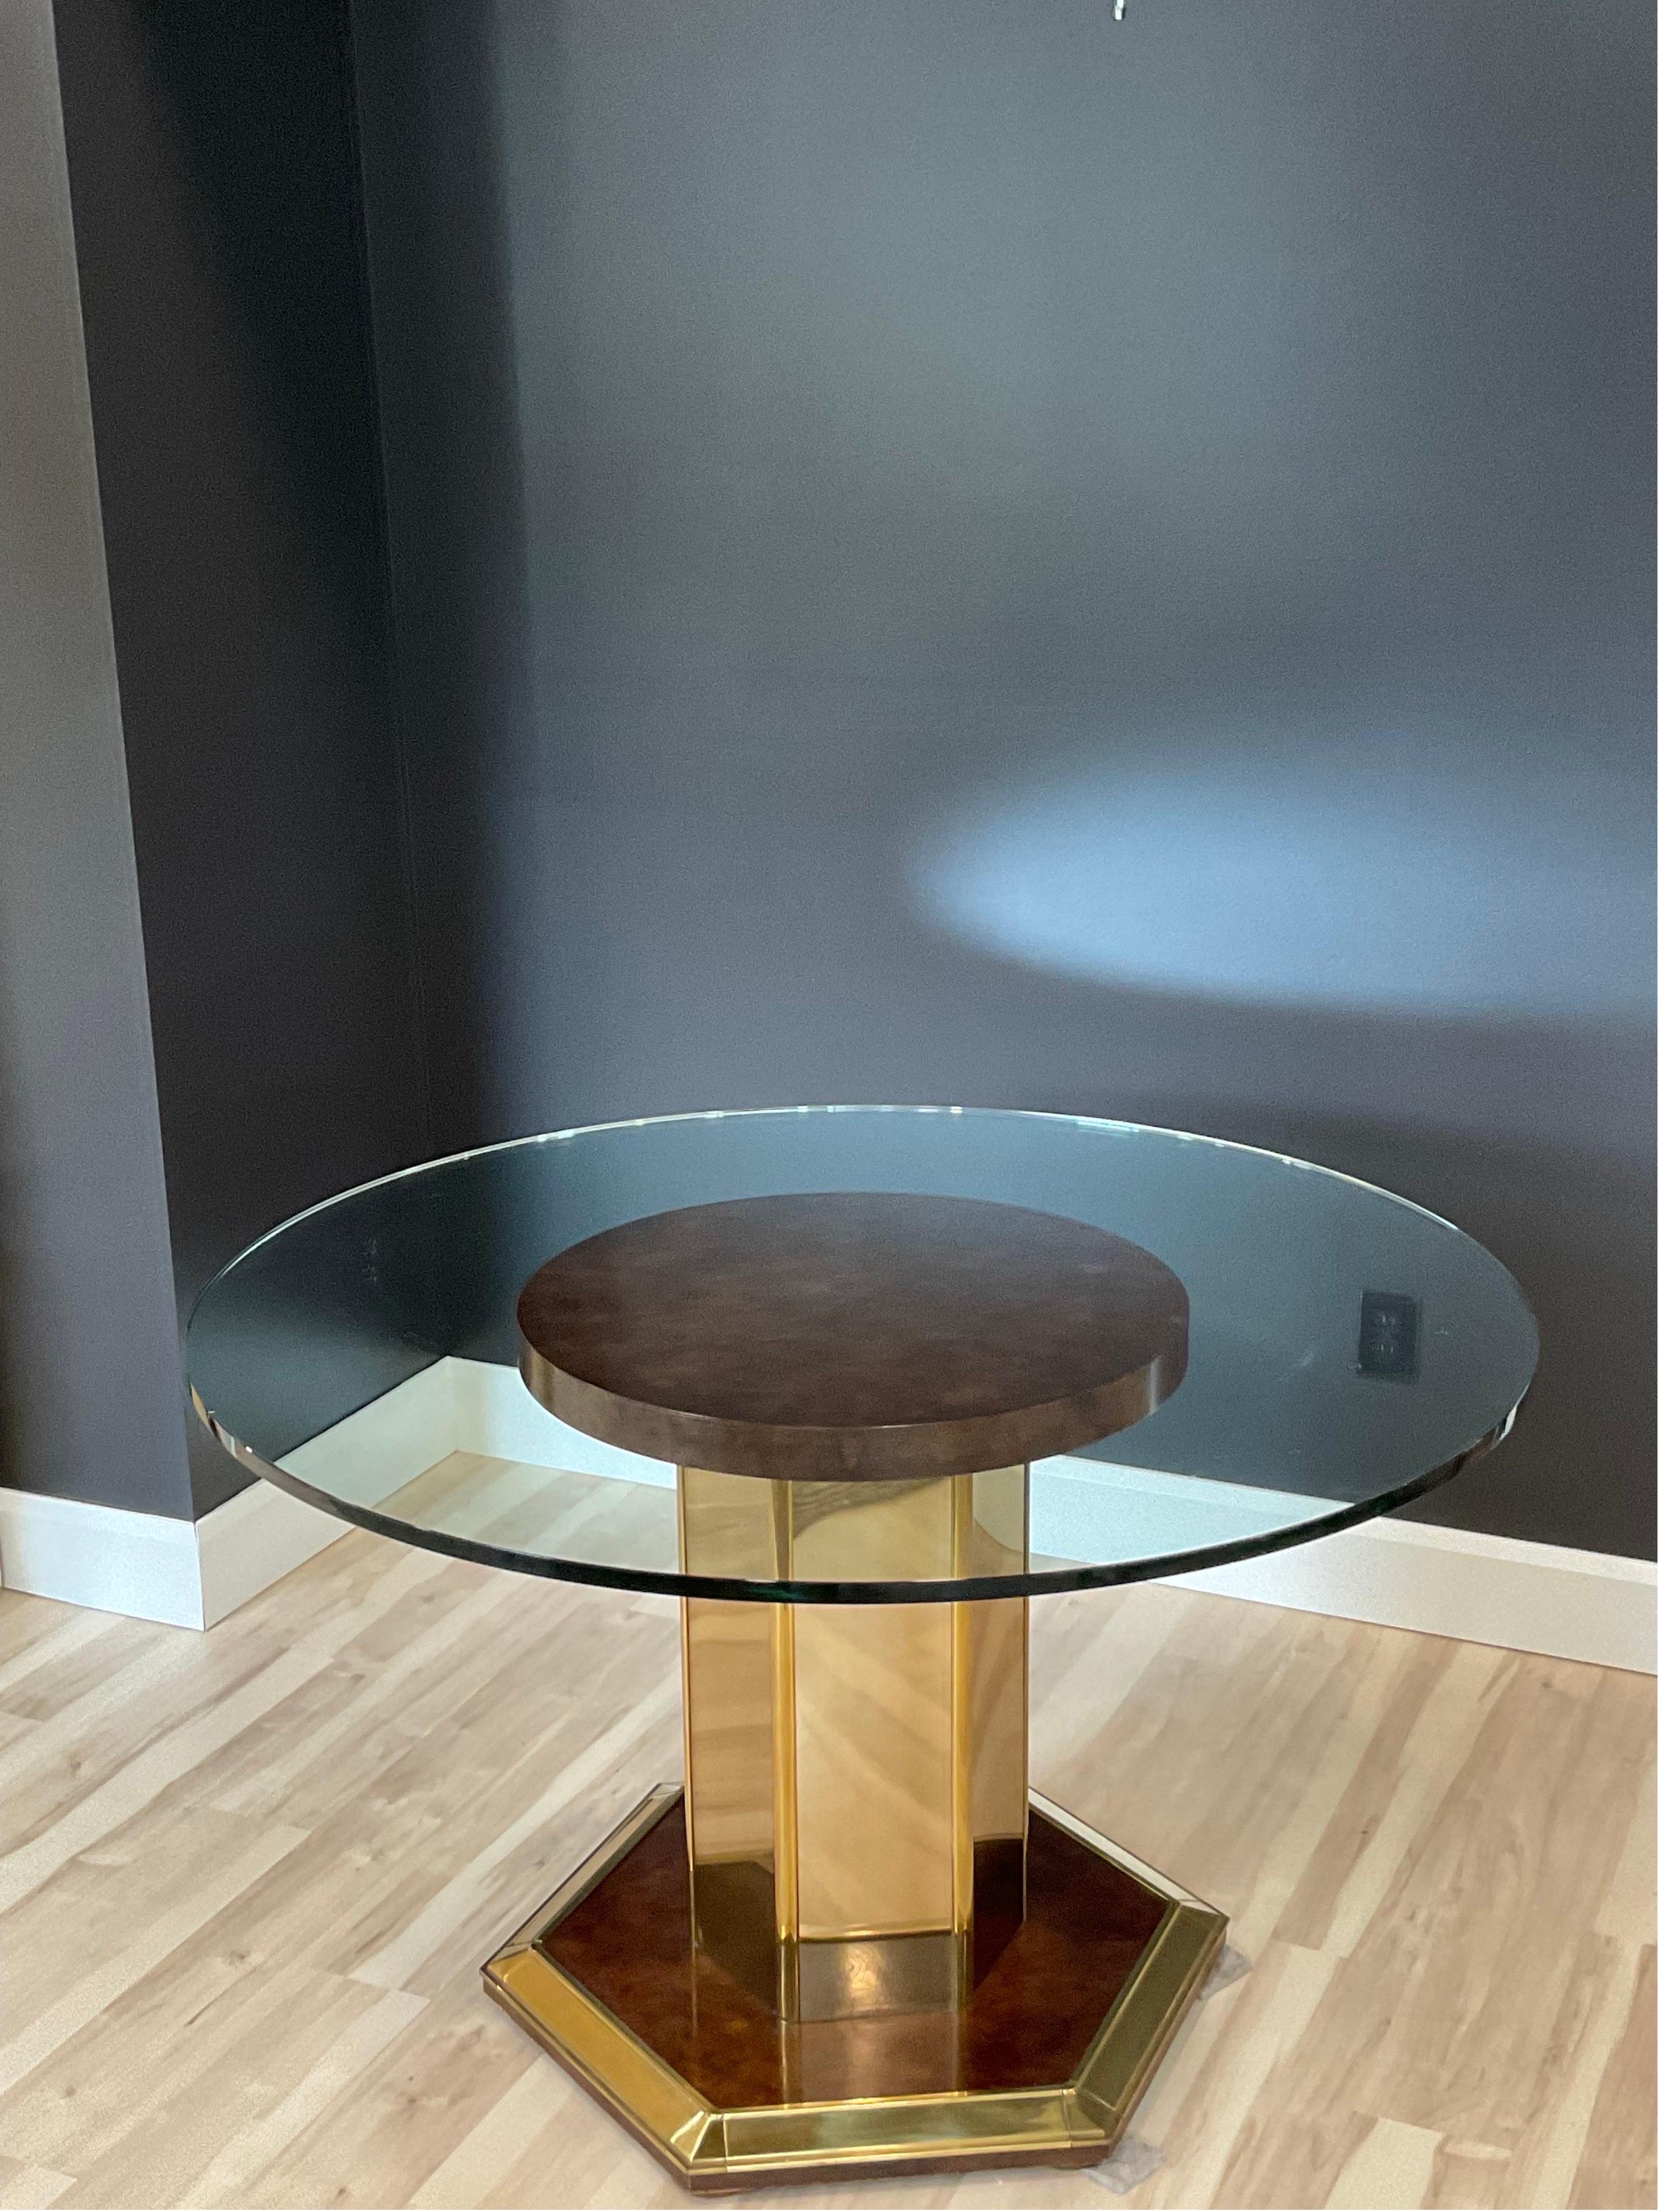 Spectacular MCM Henredon round burl wood, brass and glass dining table. Just a beauty. Pictured with a 50” top however the original 60” glass top comes with the table. Stunner in person.


Condition Disclosure:
Please understand nearly all of